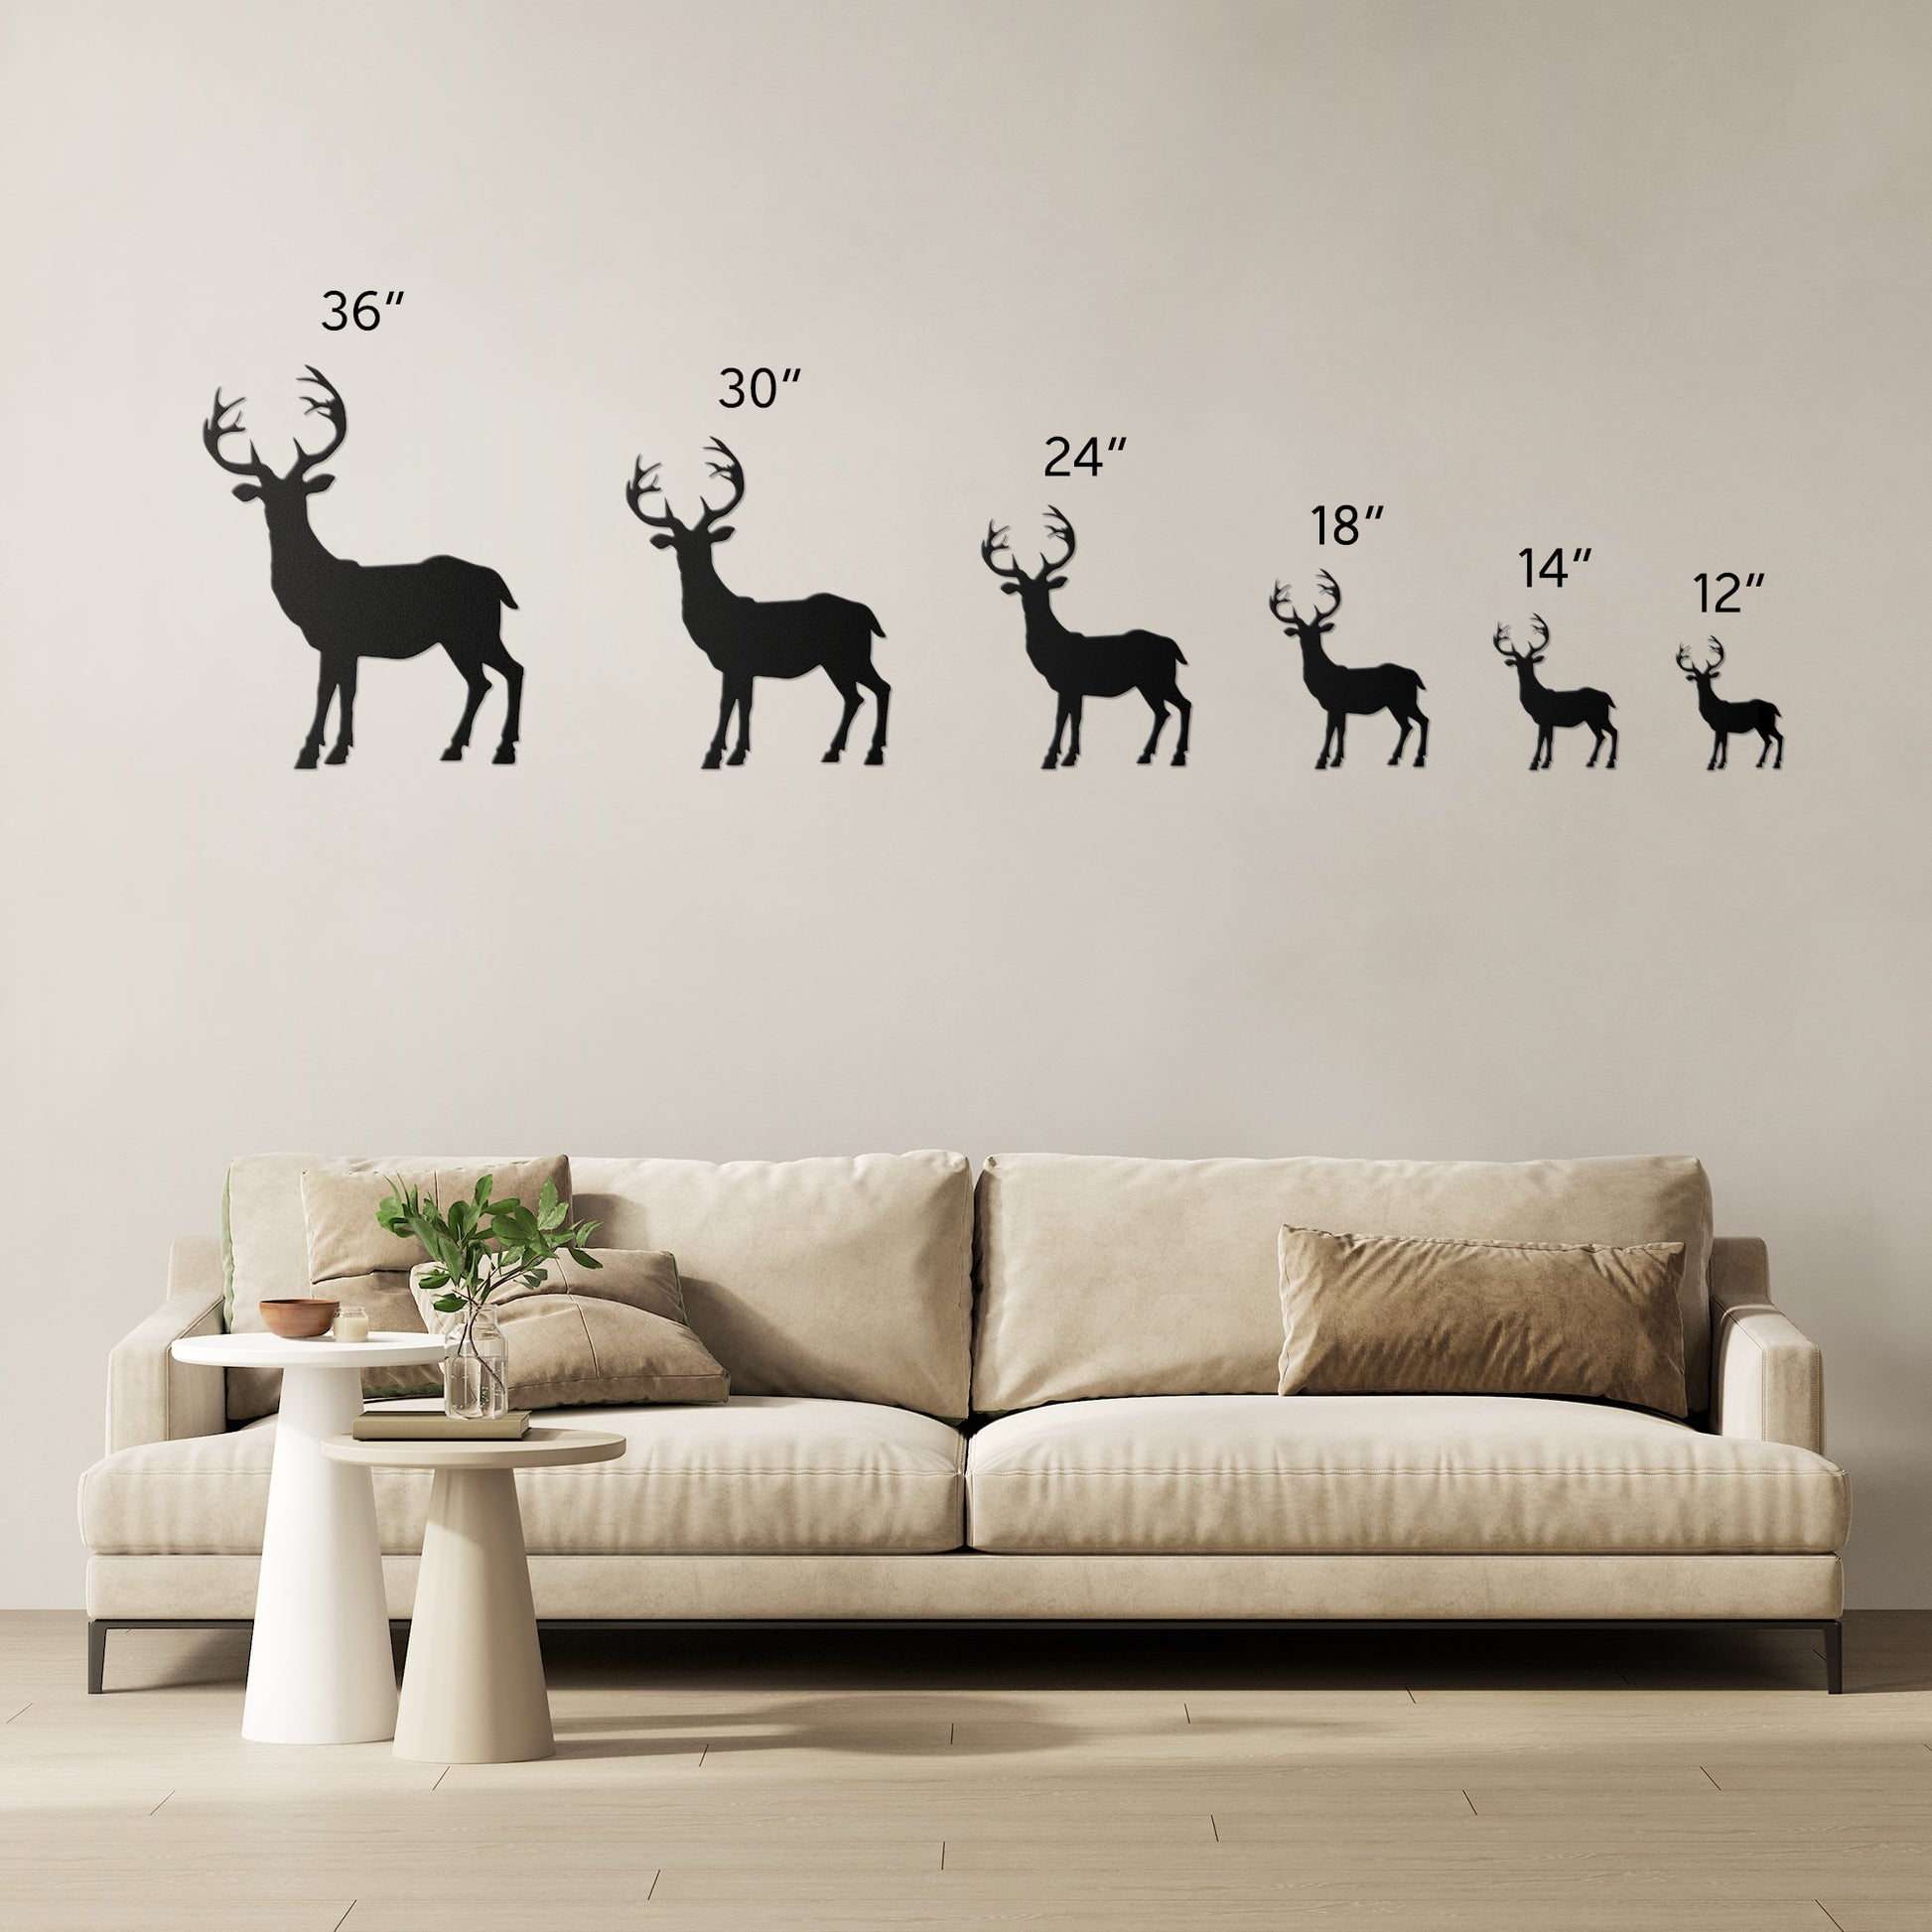 "Deer Buck" Steel Wall Art - Weave Got Gifts - Unique Gifts You Won’t Find Anywhere Else!